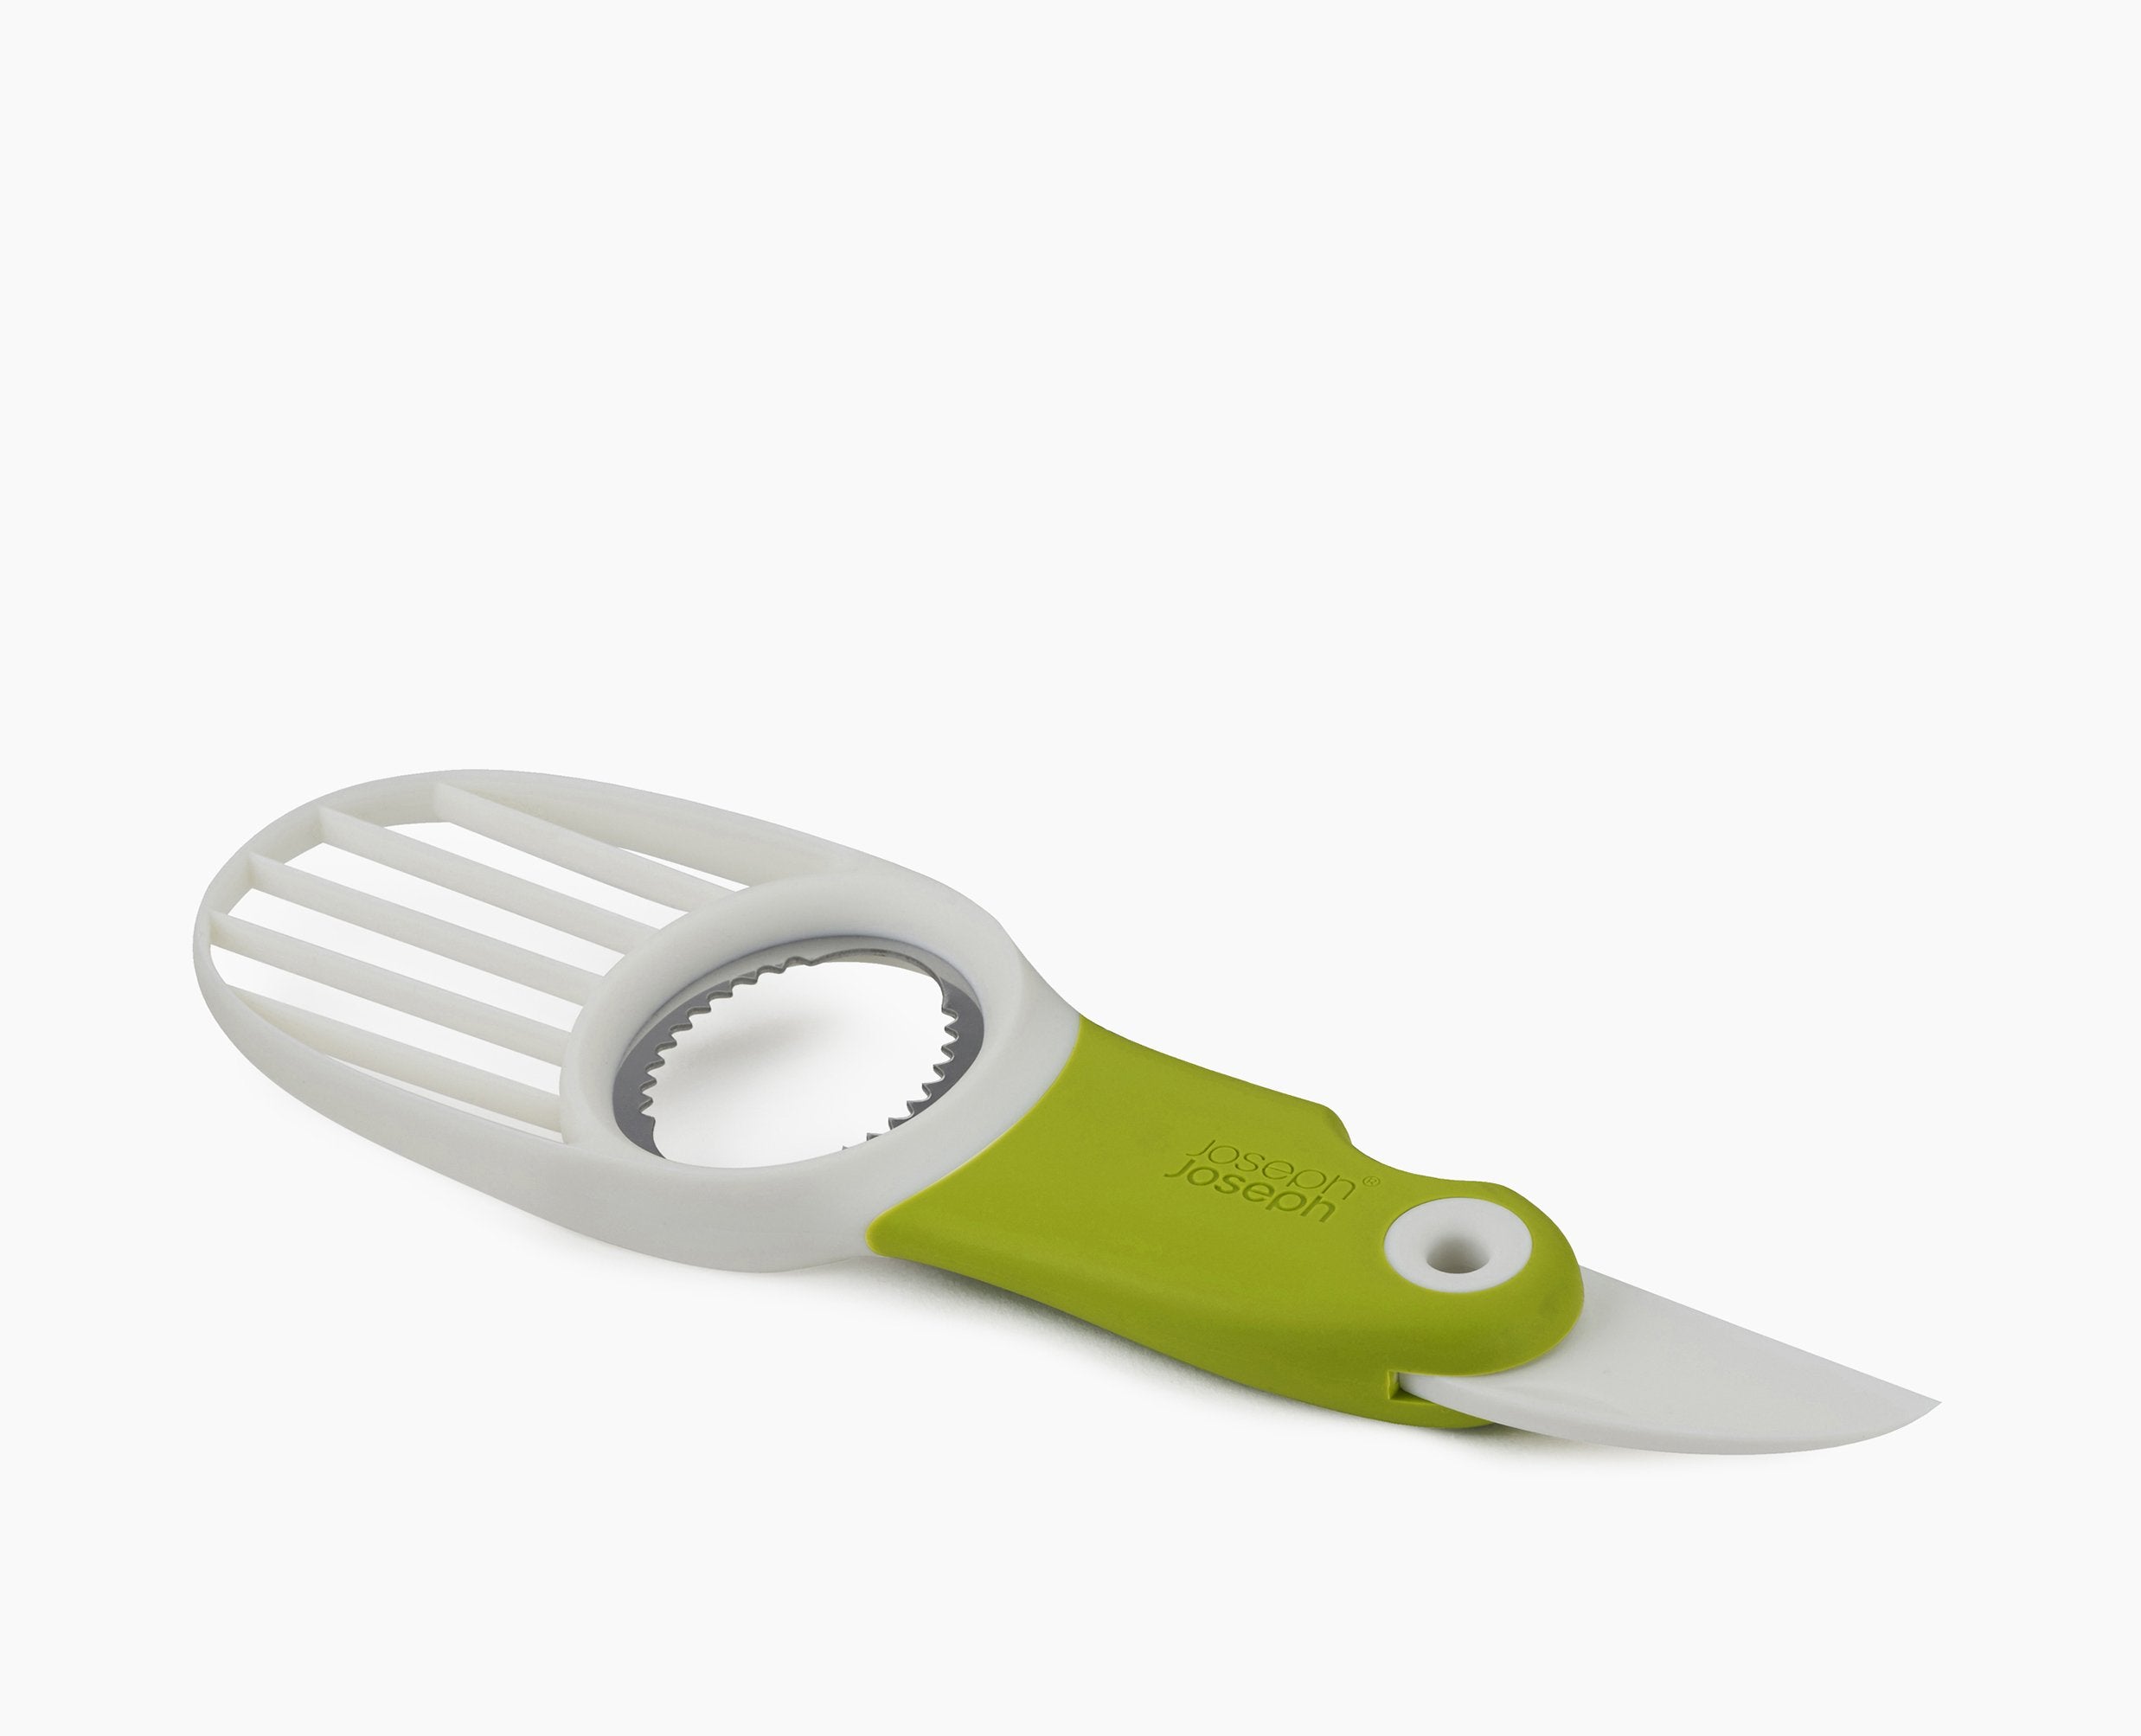 BEON.COM.AU  This avocado tool allows you to safely cut, de-stone, scoop and slice avocados all in one handy gadget.  Cuts, de-stones and slices in one Versatile slice & scoop head Stainless-steel pitter to safely remove stone Folding plastic blade for safe storage Ergonomic, soft-grip handle  Specificat... Joseph Joseph at BEON.COM.AU